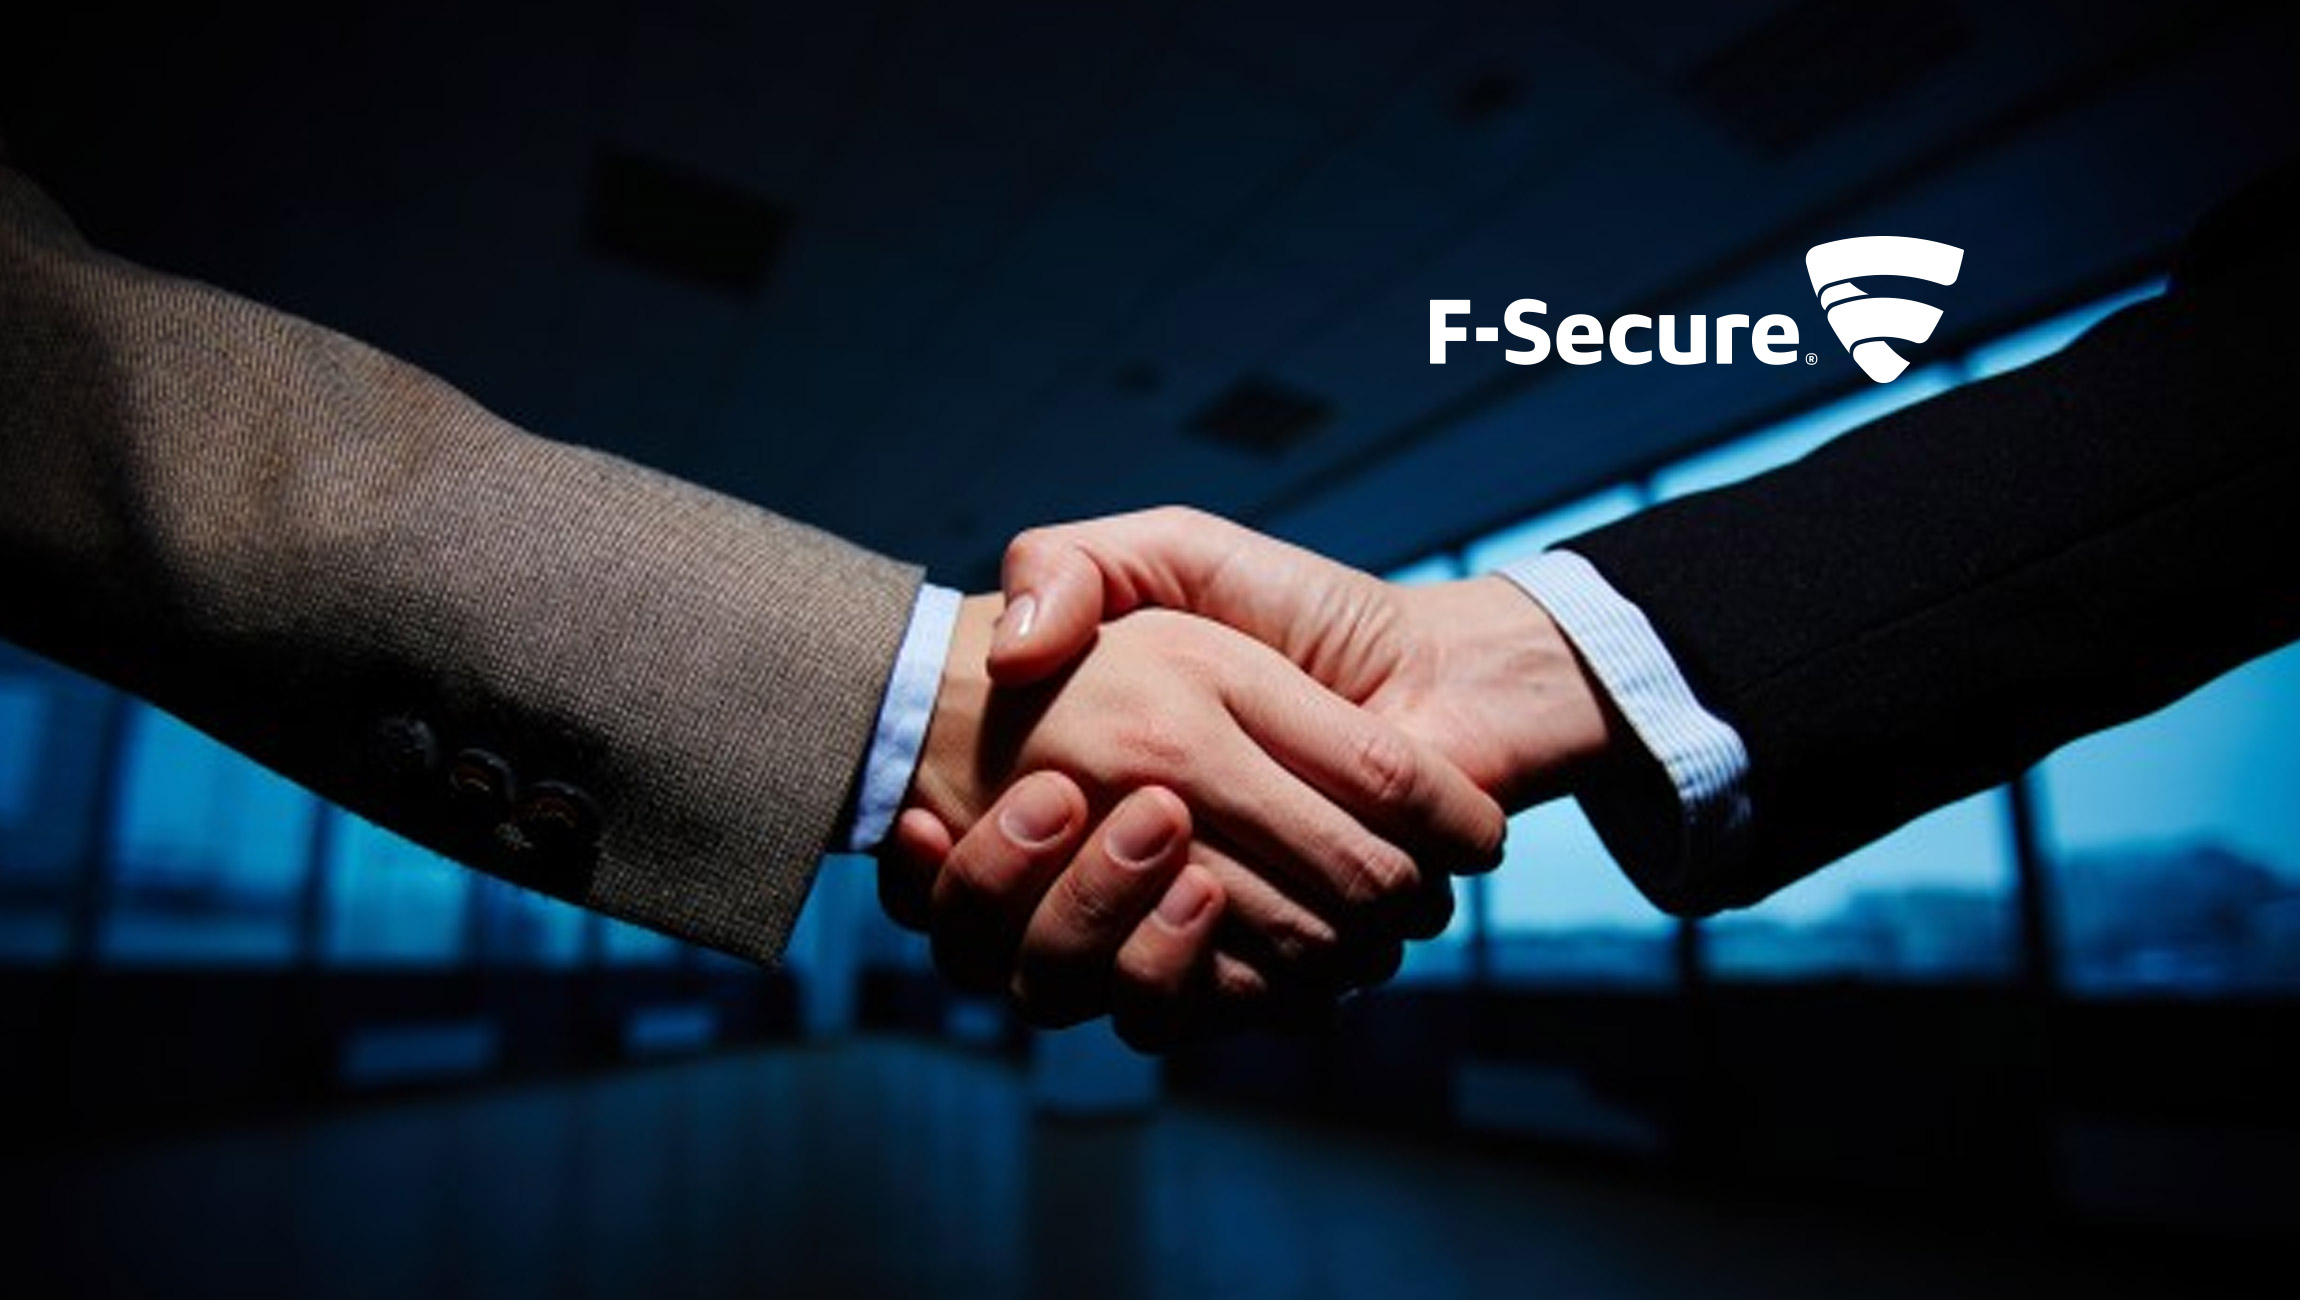 F-Secure's Global Partner Program Earns Program Of the Year Accolades